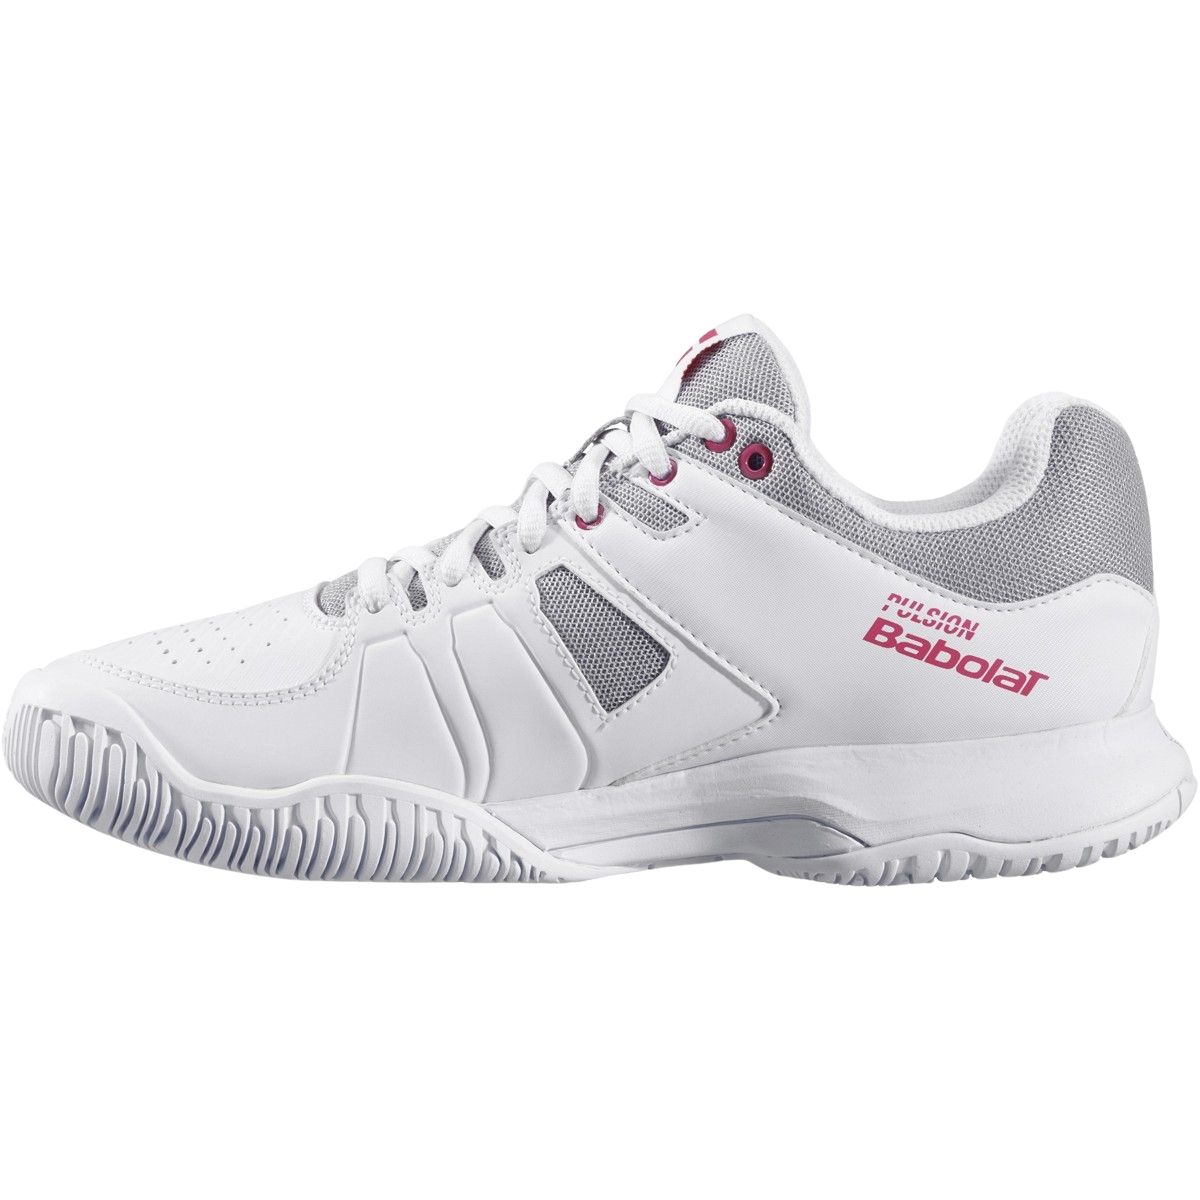 Women's Pulsion All Court Tennis Shoes White 